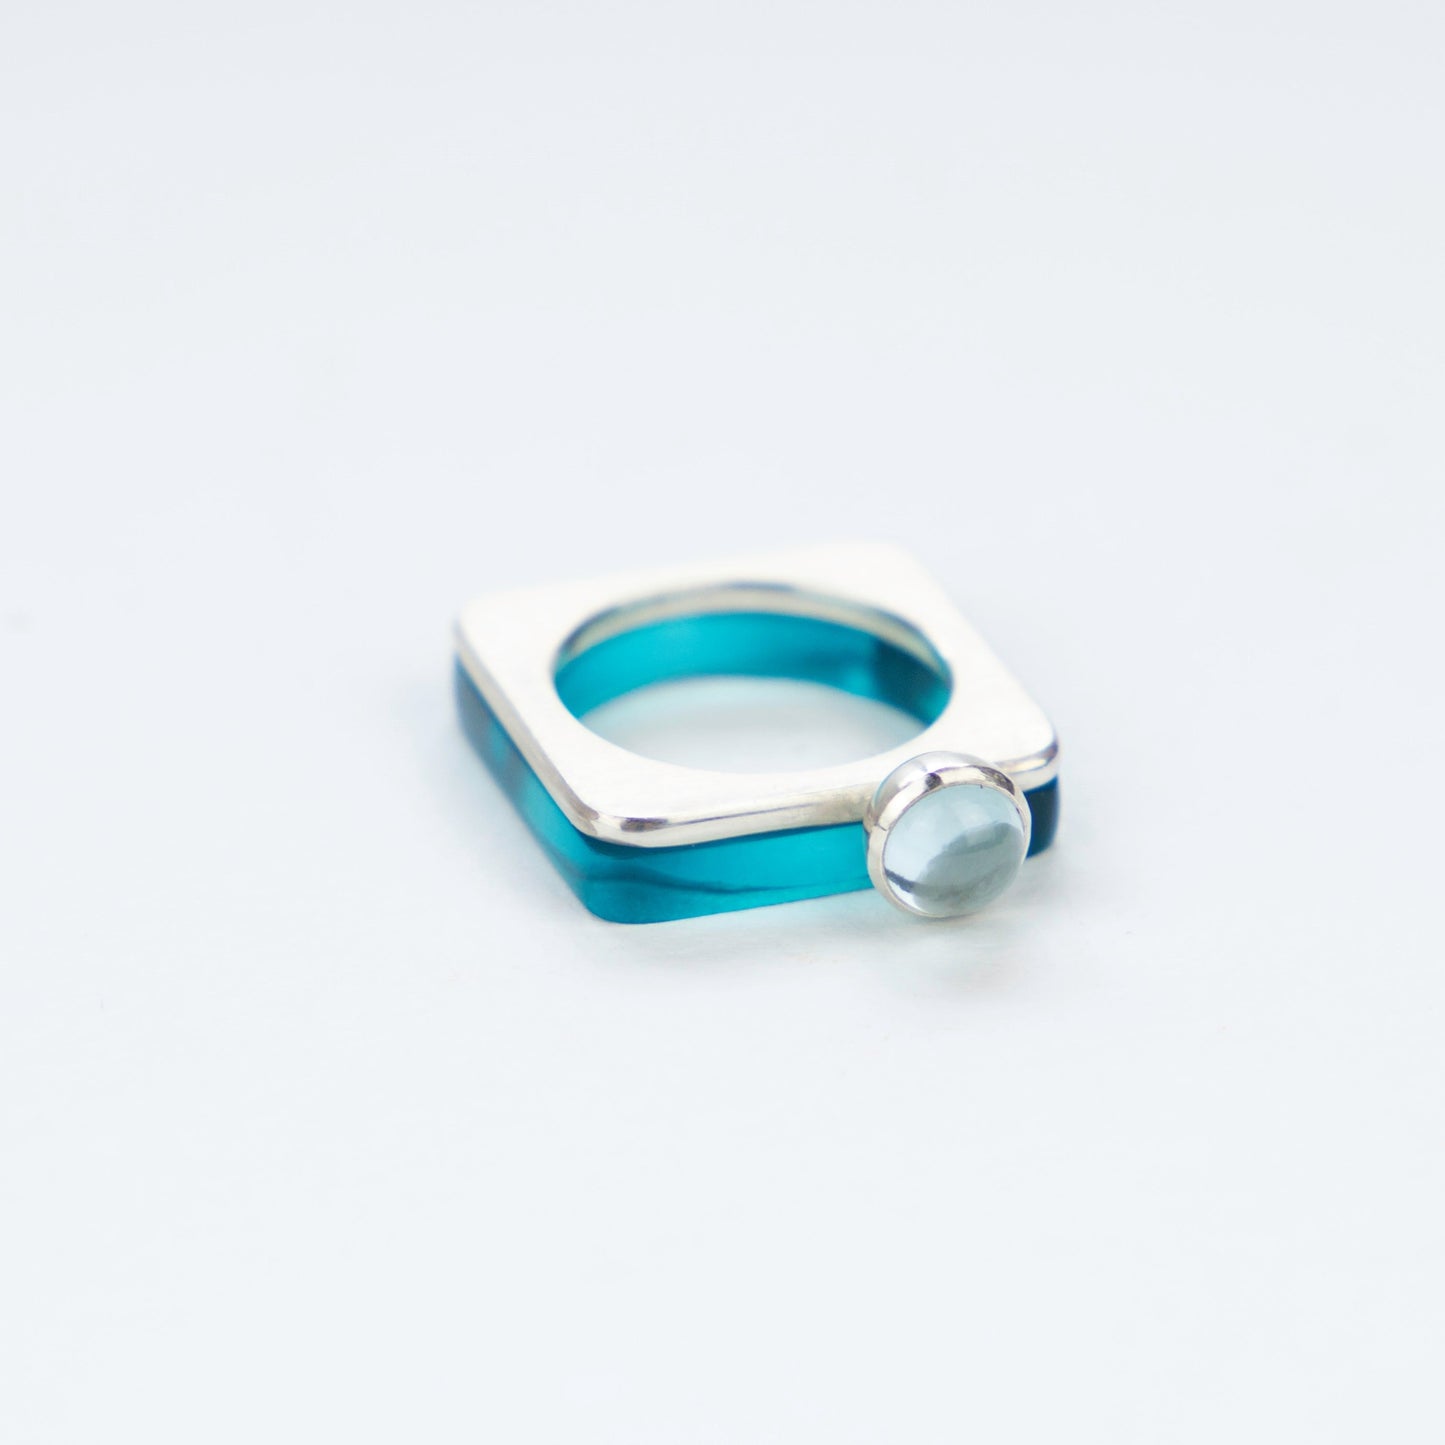 Square silver ring with pale topaz and azure perspex ring www.barbaraspence.co.uk